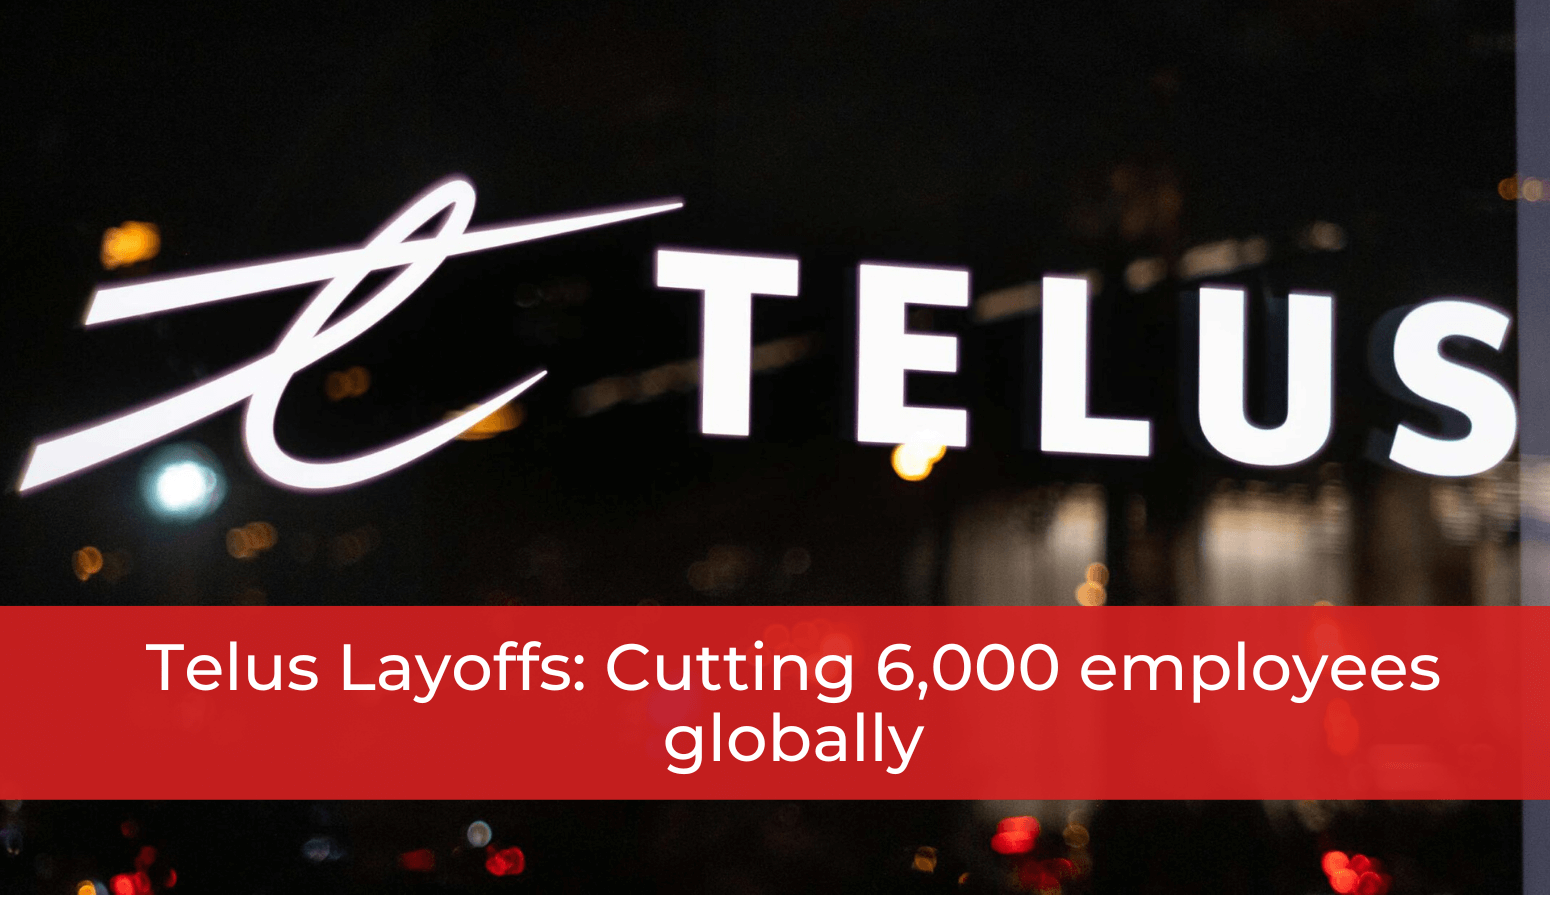 Featured image for “Telus Layoffs: Cutting 6,000 employees globally”